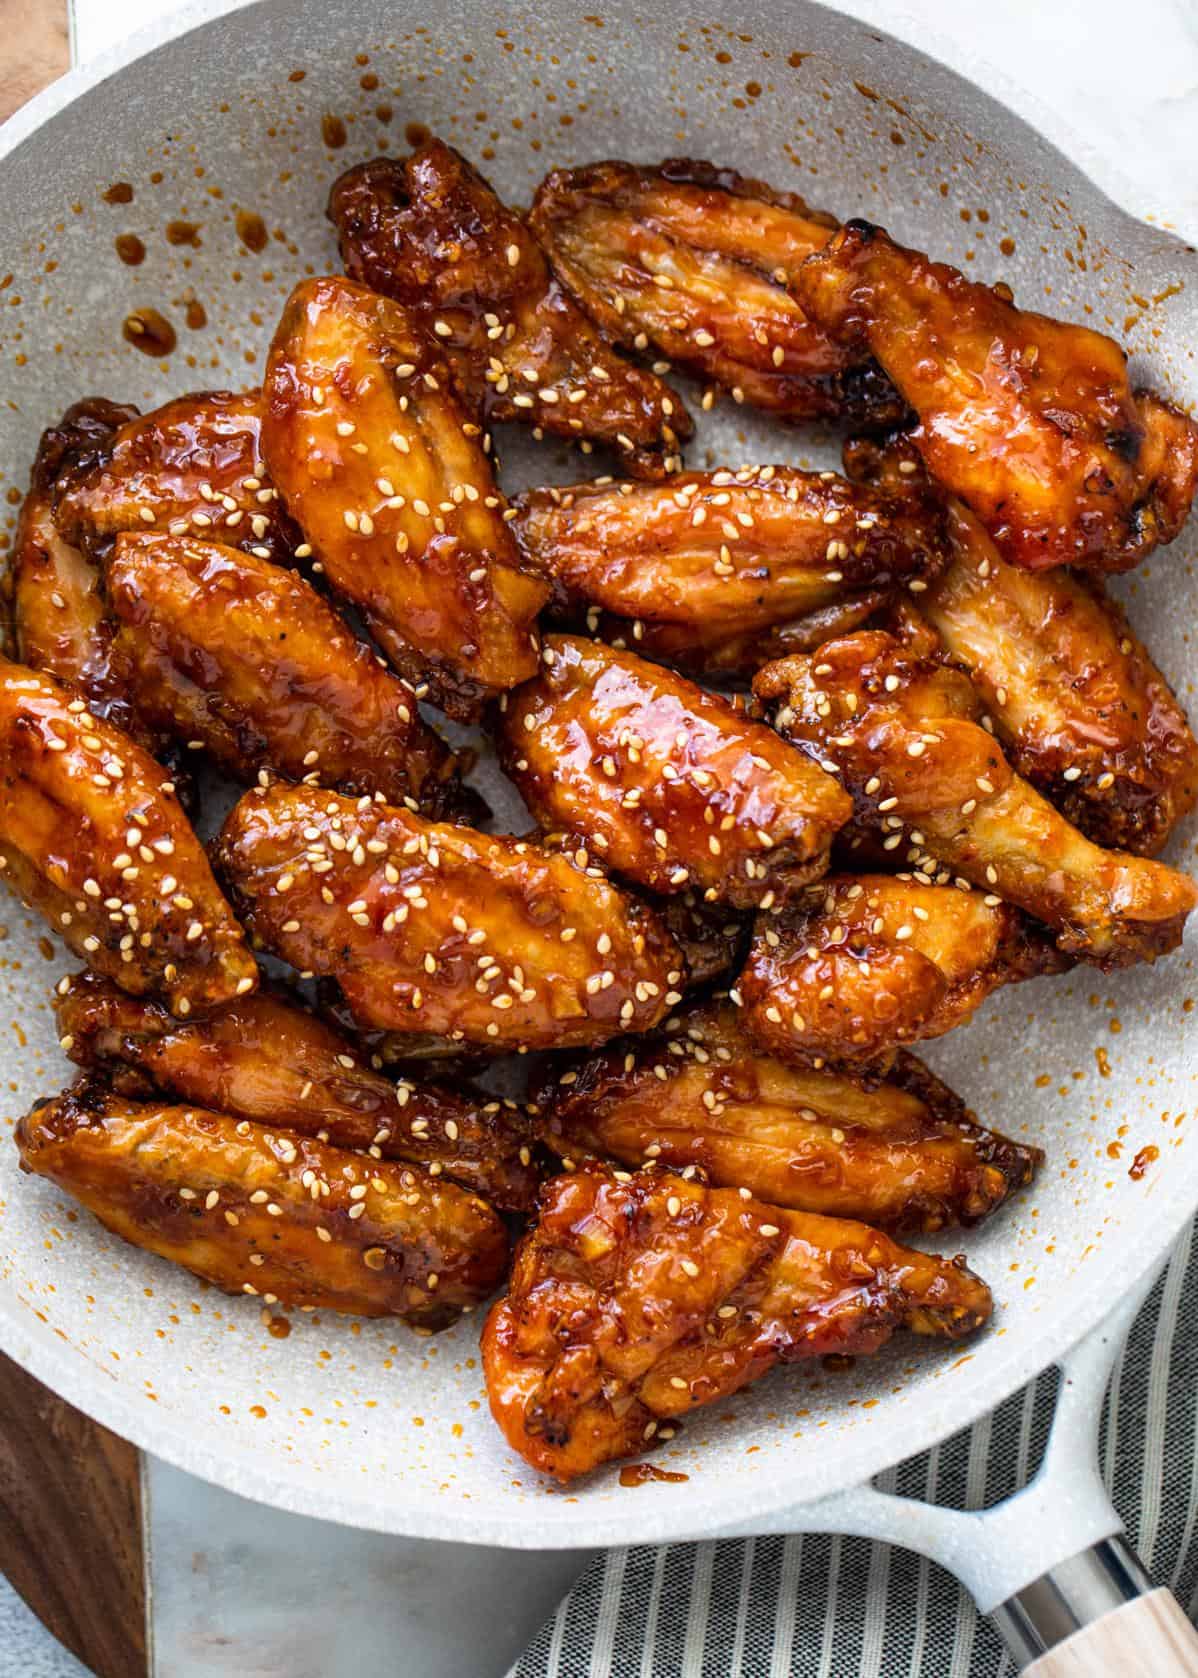  Don't let their size fool you--these wings pack a punch of flavor.